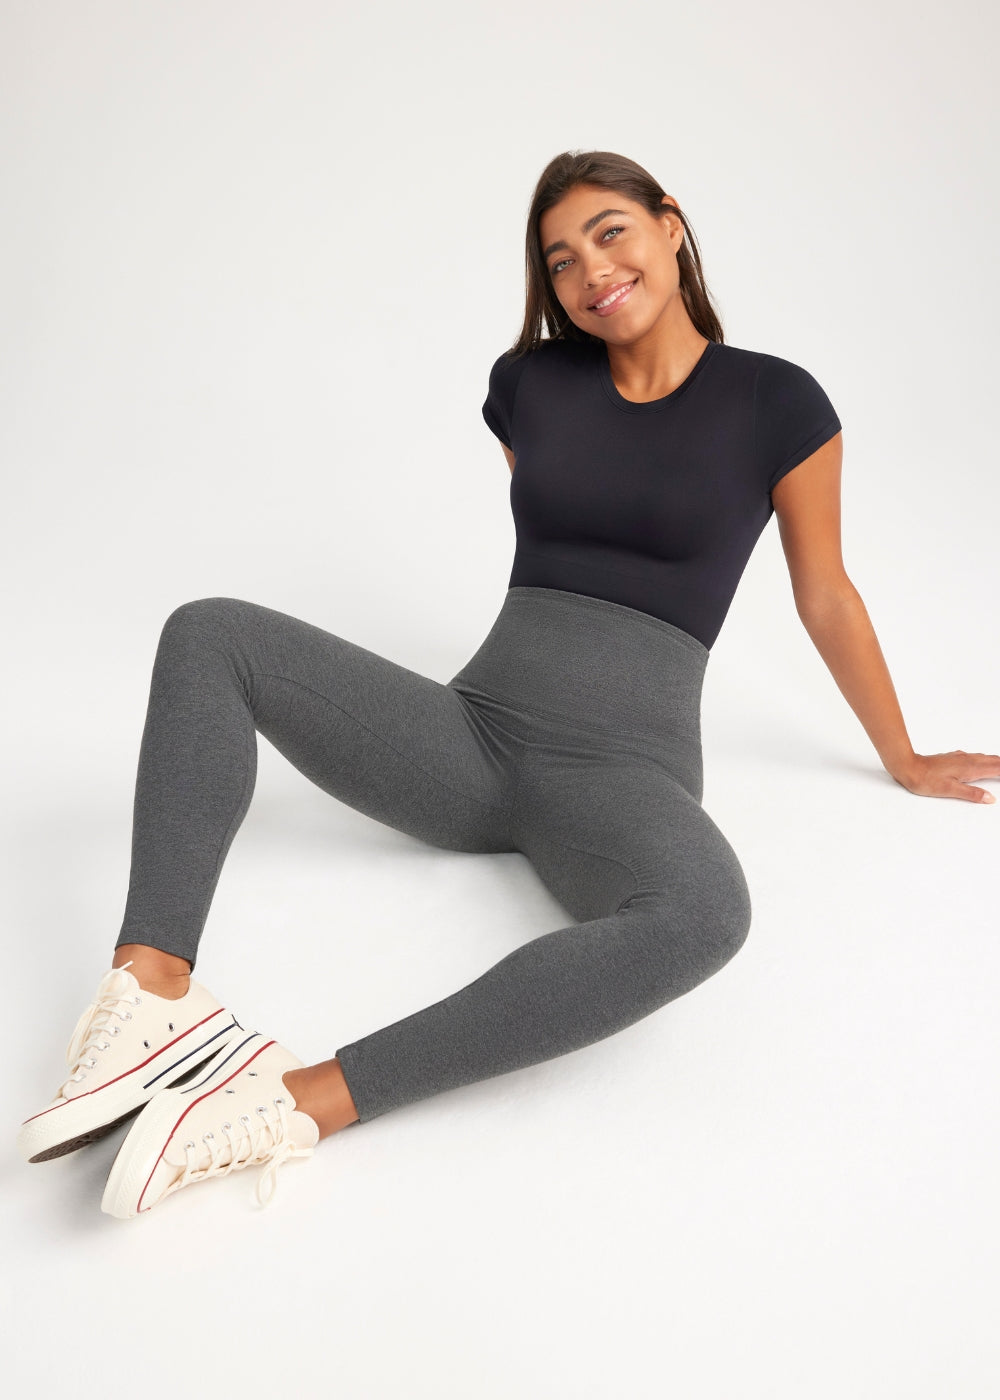 Rachel Shaping Legging with Racing Stripe - Cotton Stretch